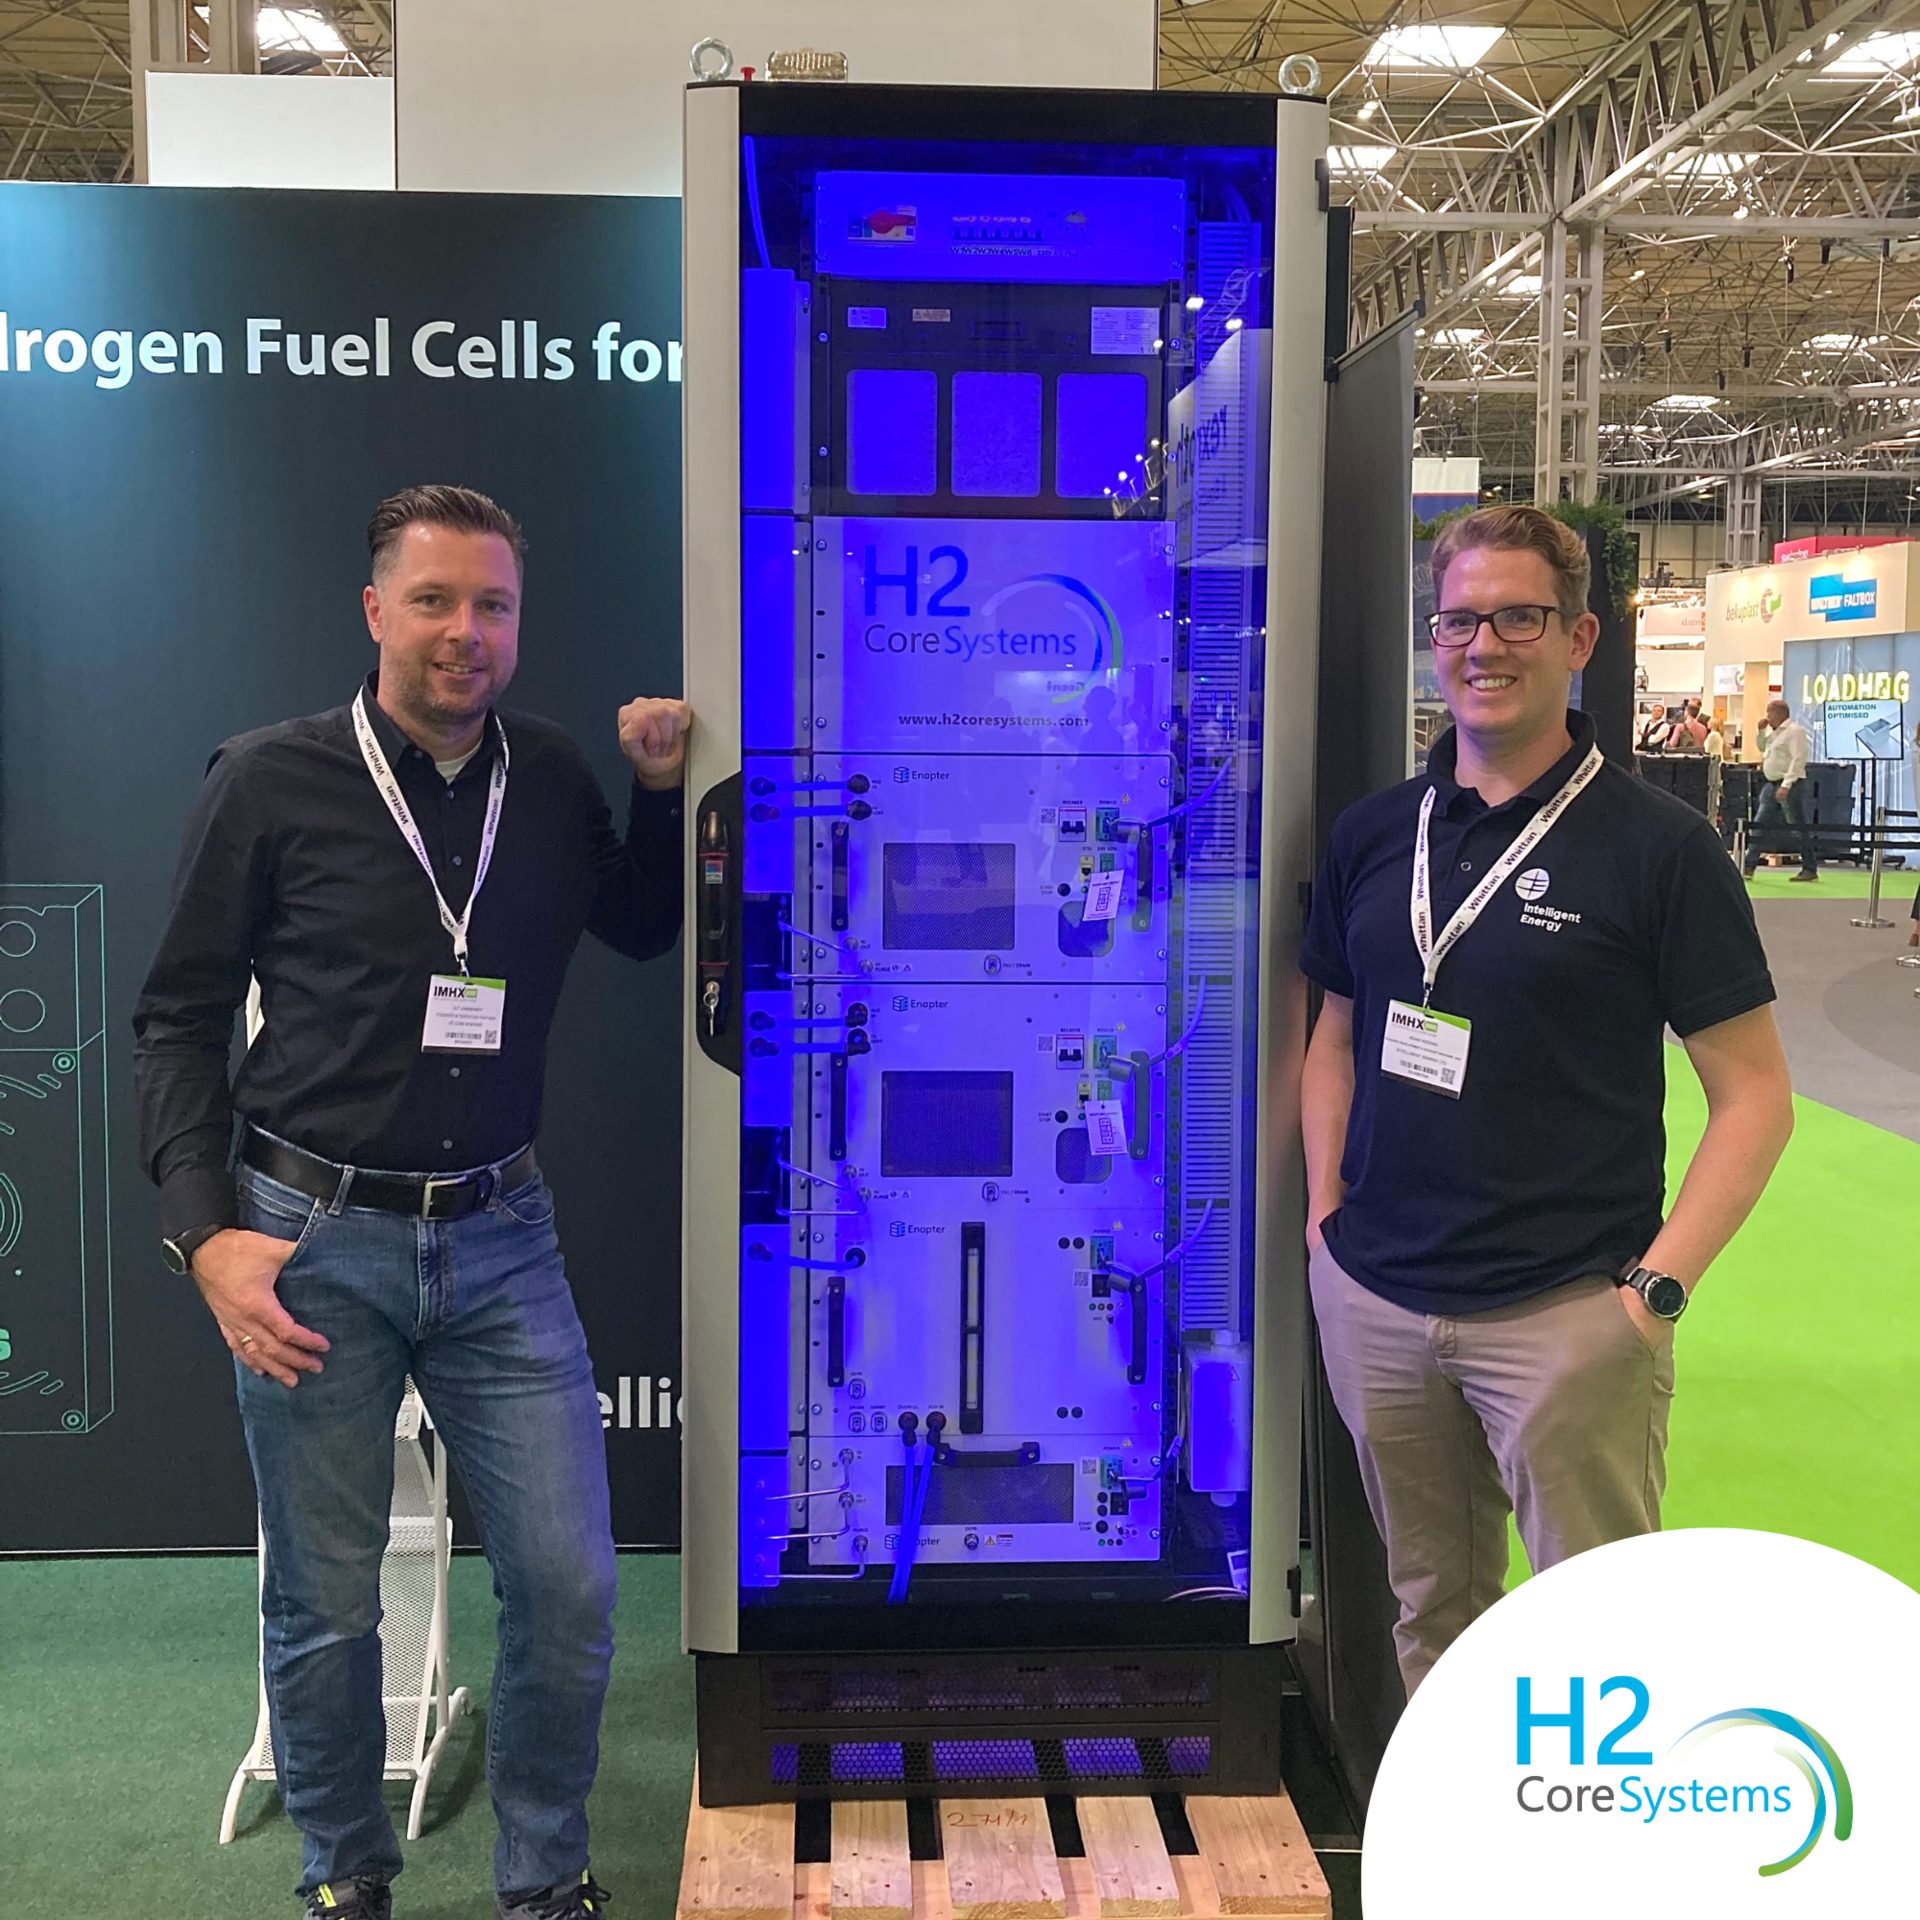 H2 Core Systems CEO Ulf Joergensen and Adam Keenan from Intelligent Energy